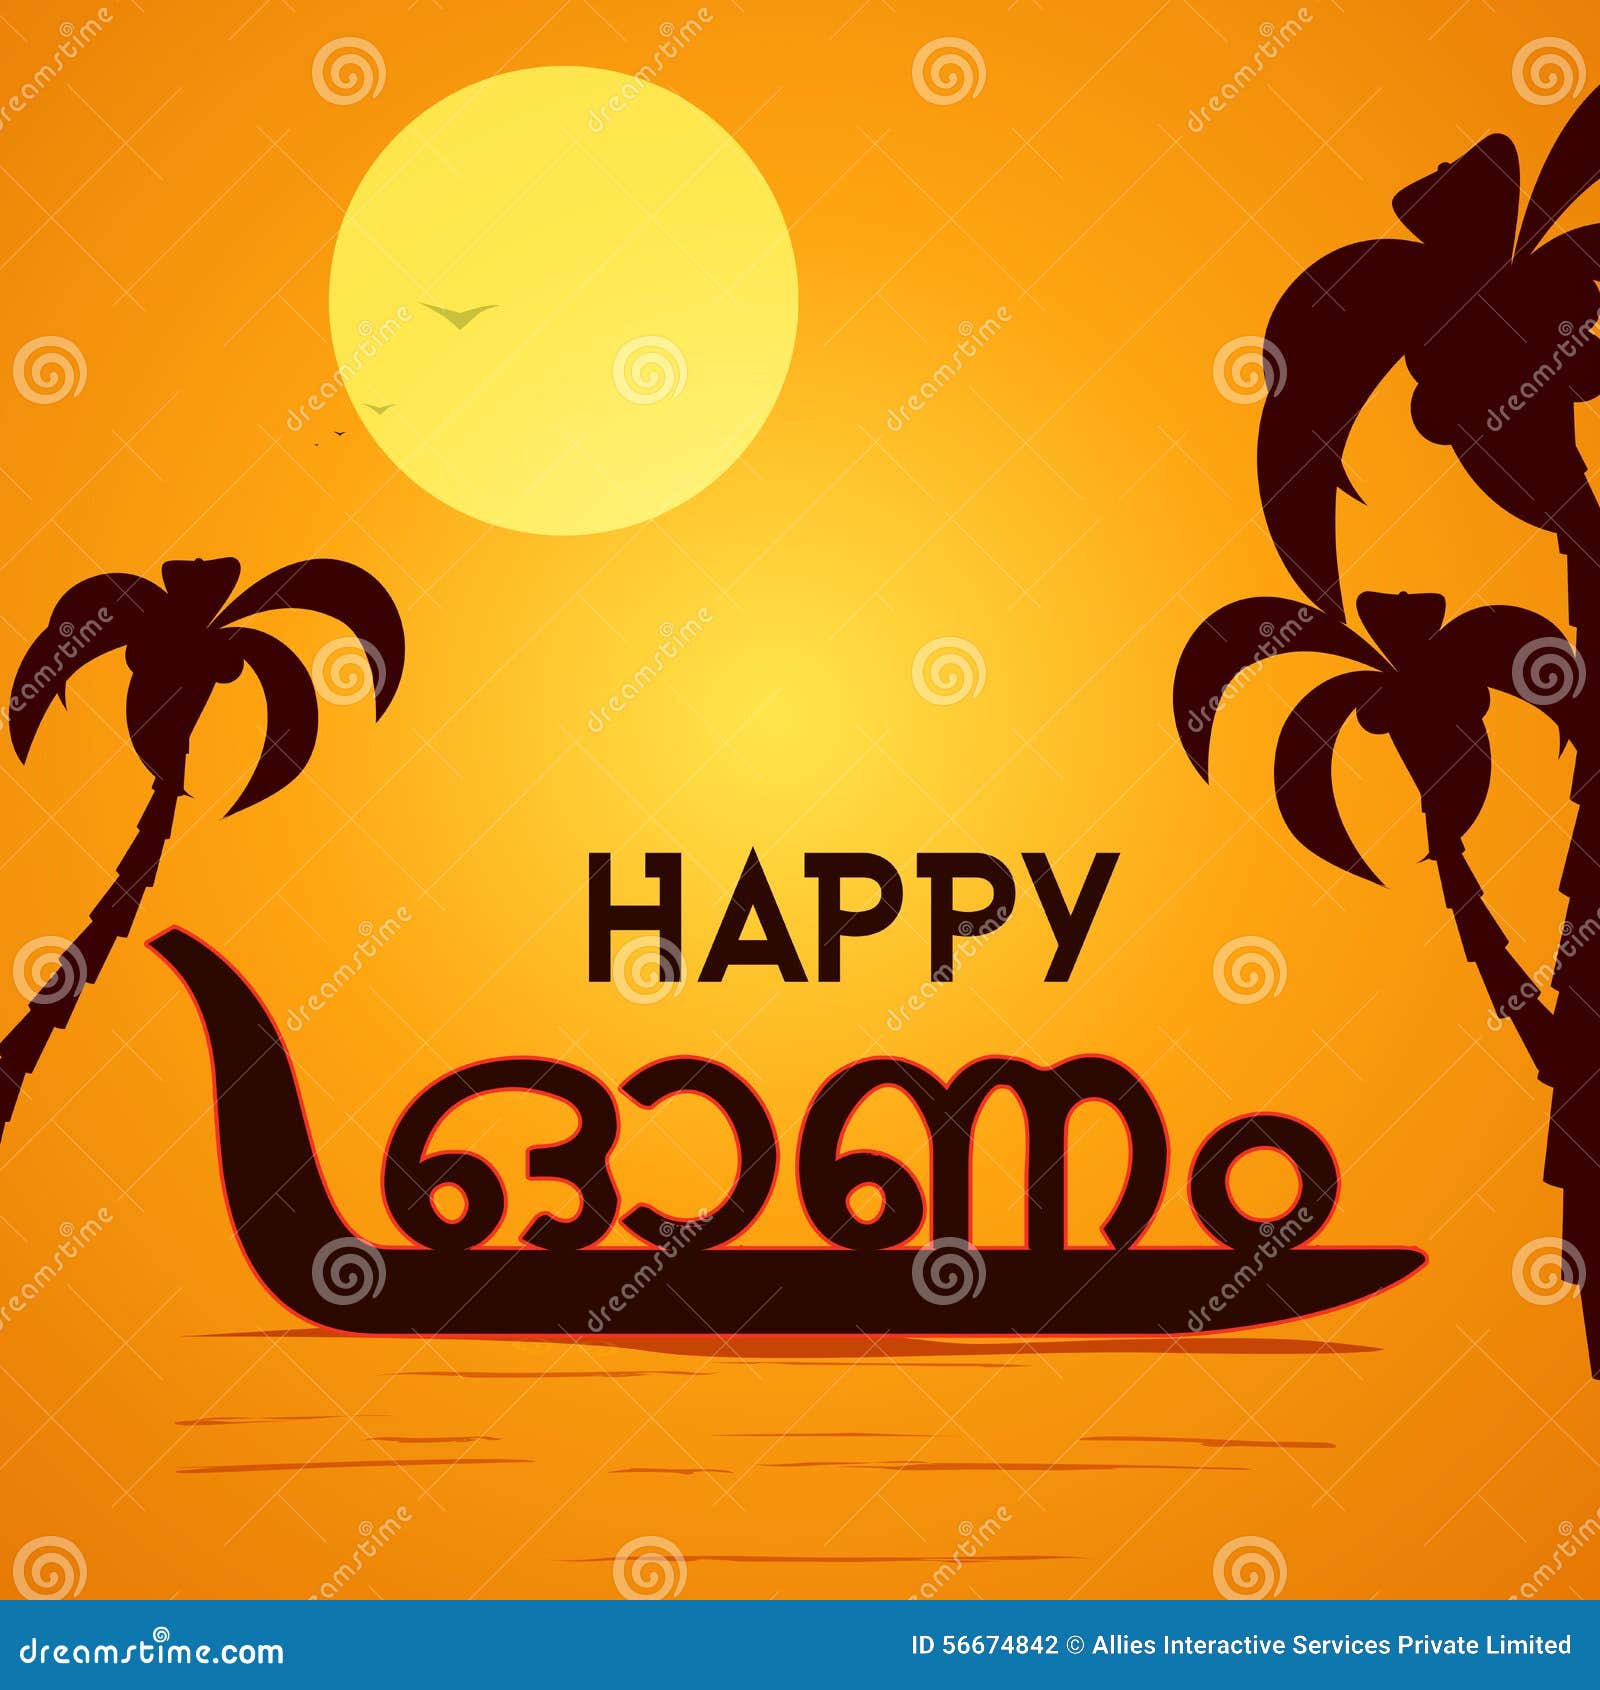 Greeting Card for South Indian Festival, Onam. Stock Illustration ...